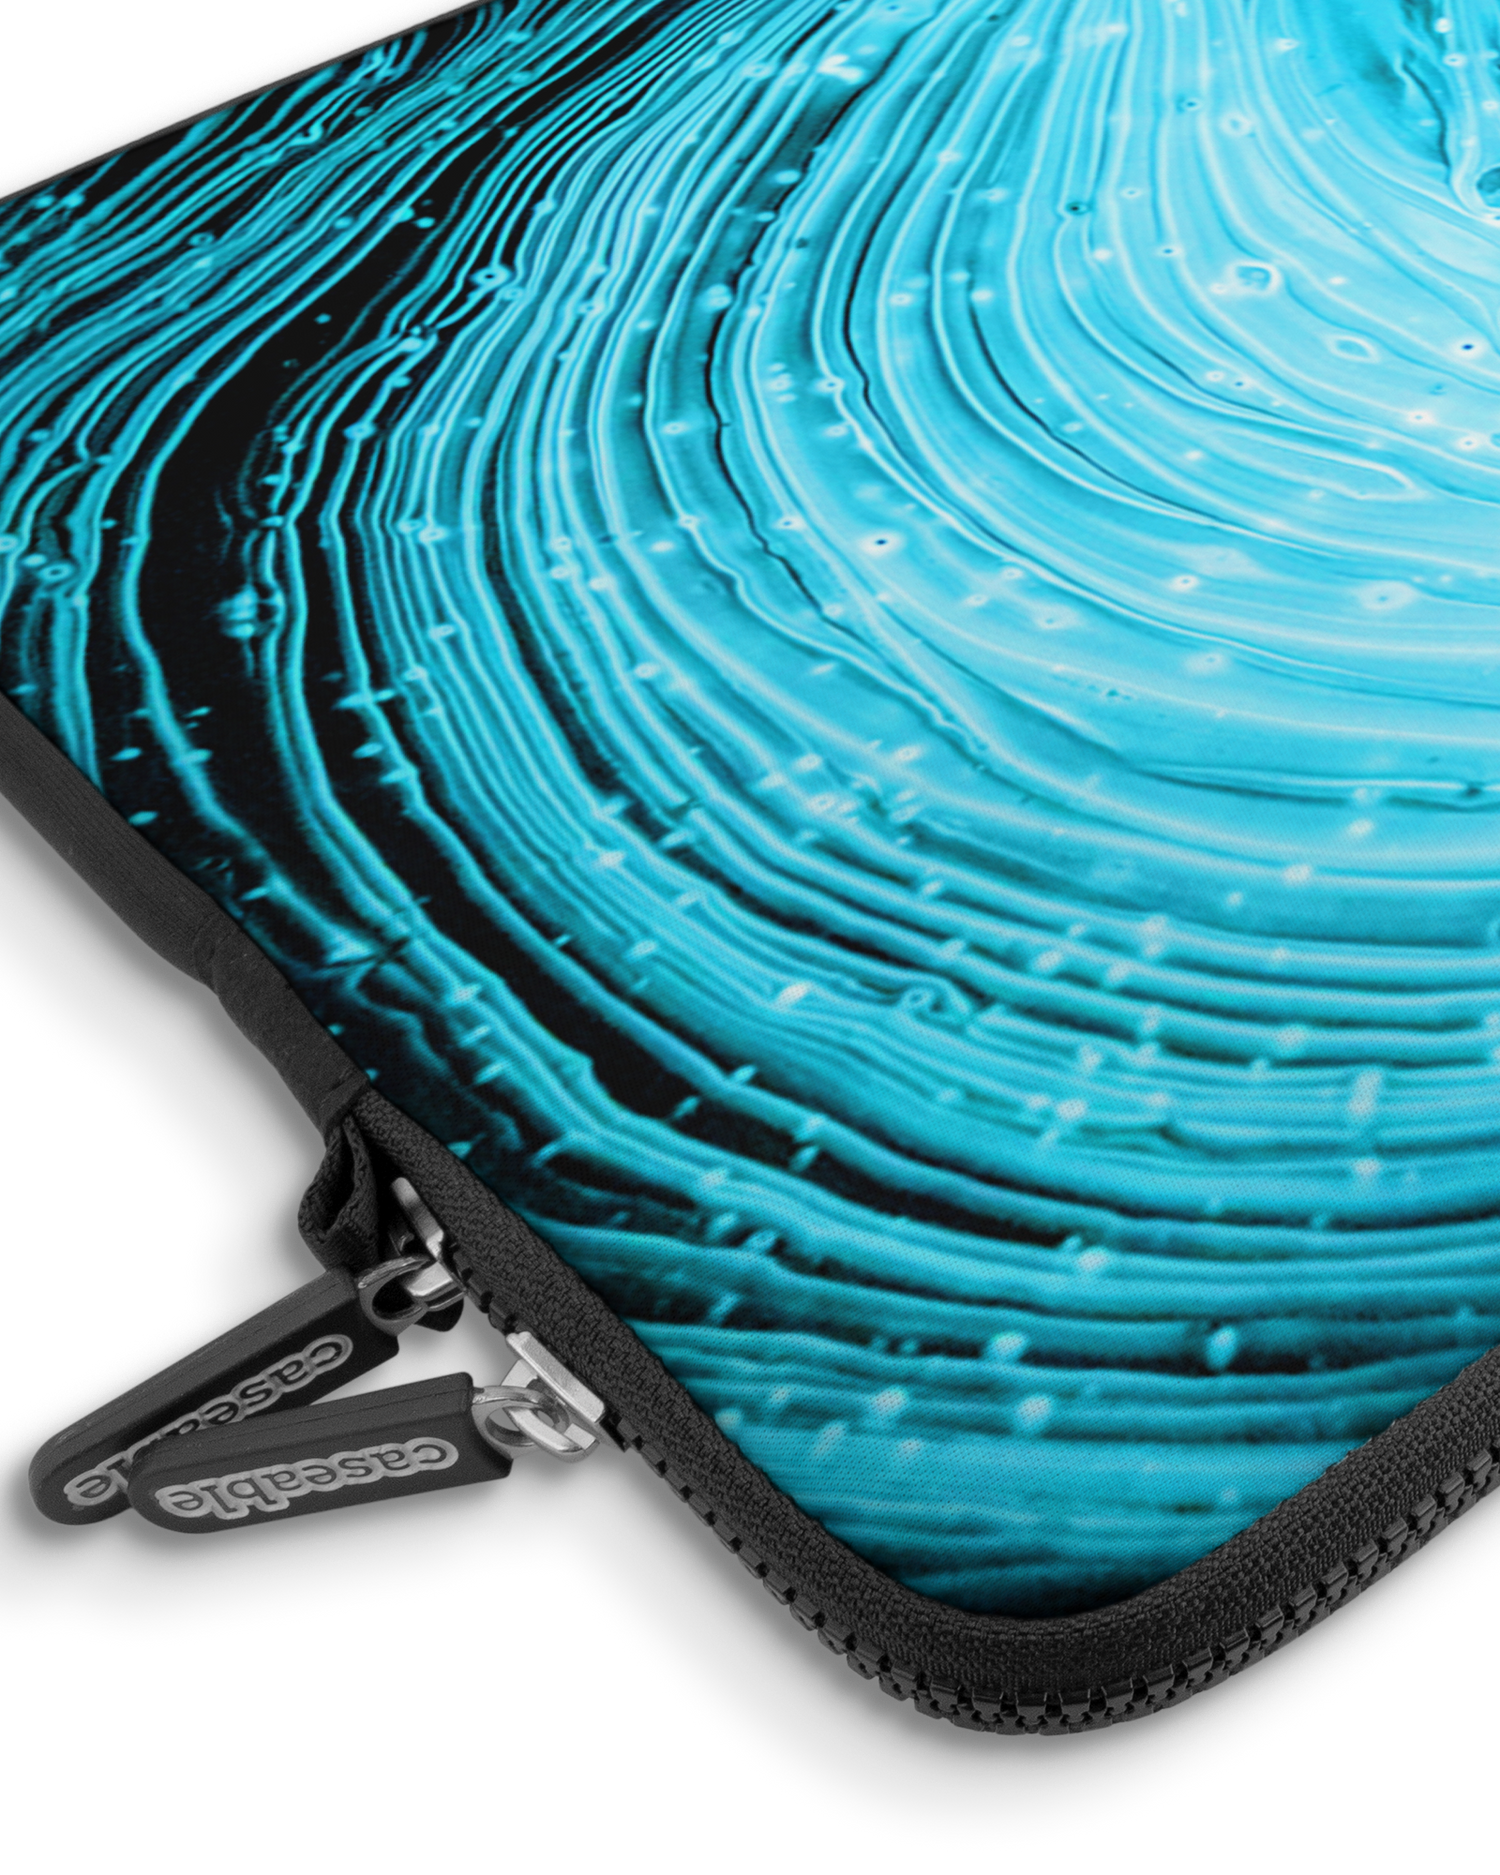 Turquoise Ripples Premium Laptop Bag 15 inch with device inside